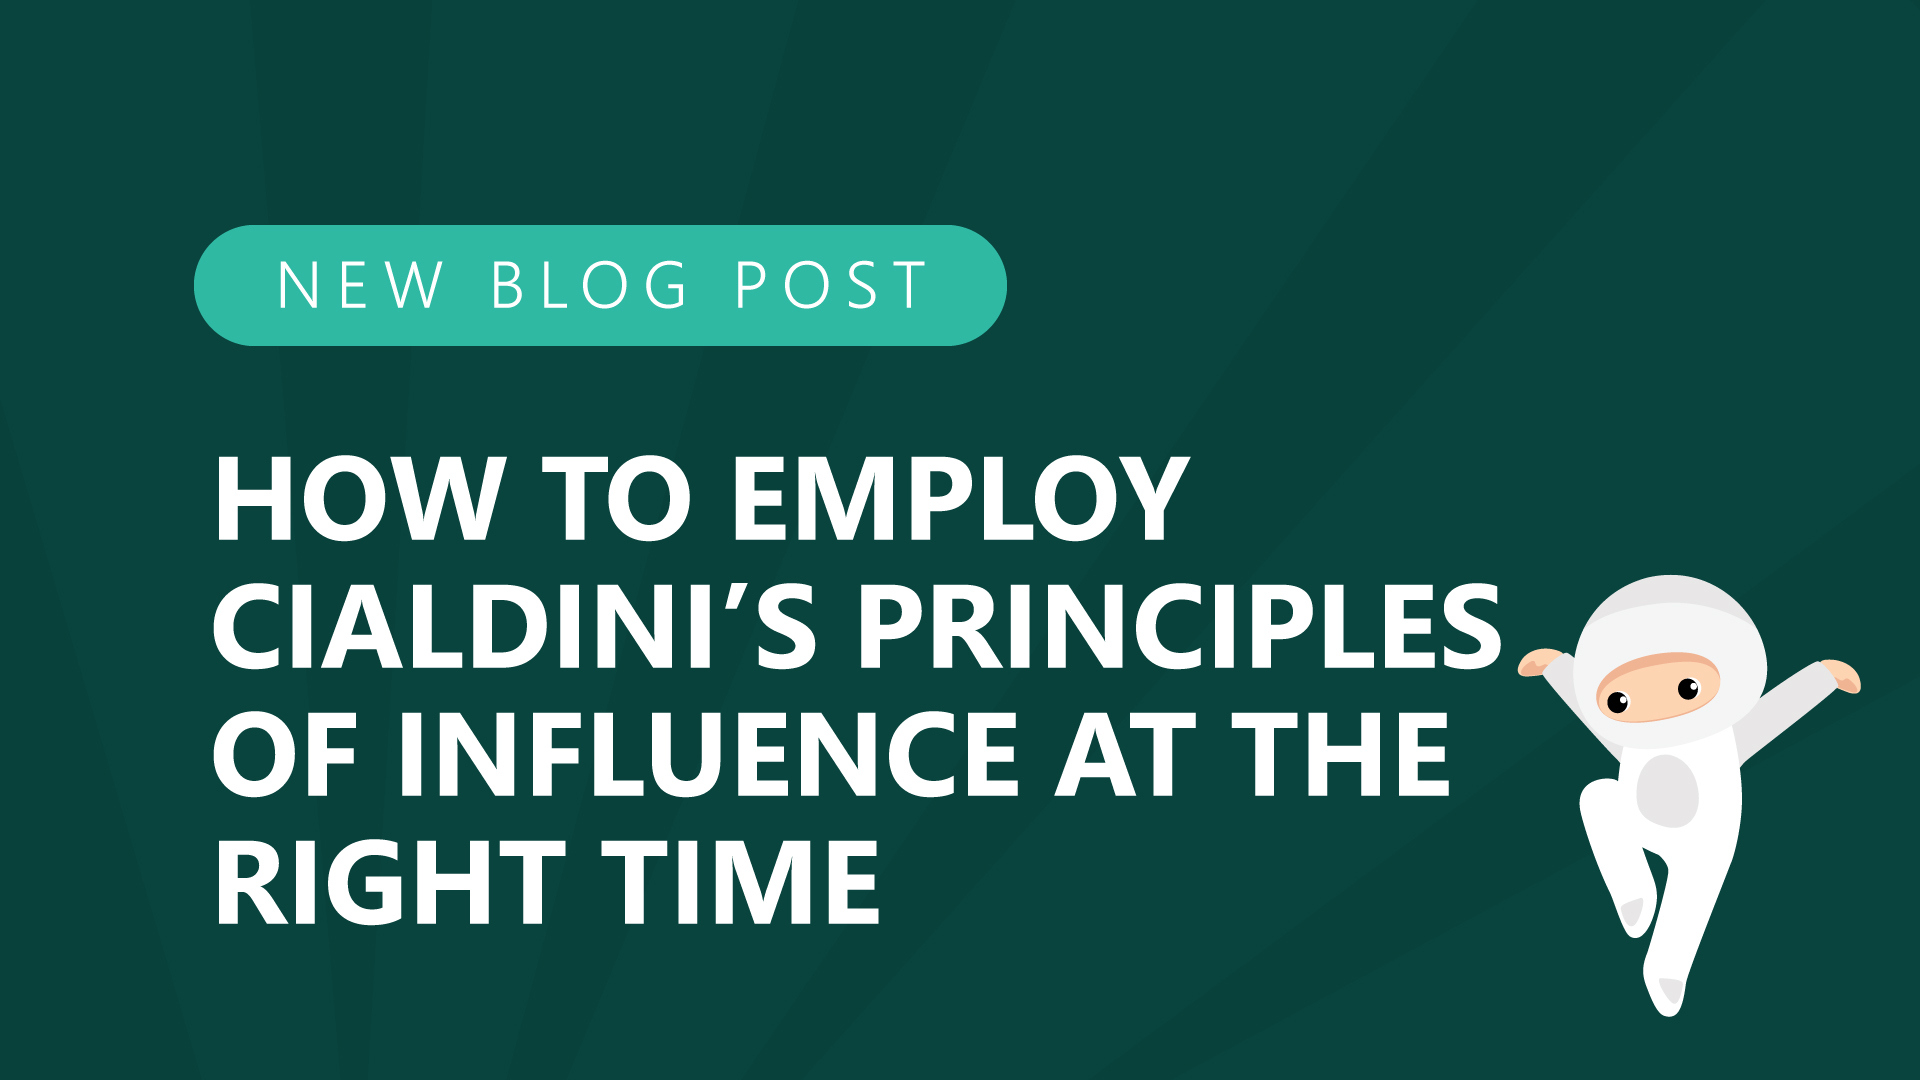 16-How-to-Employ-Cialdinis-Principles-of-Influence-at-the-Right-Time.jpg